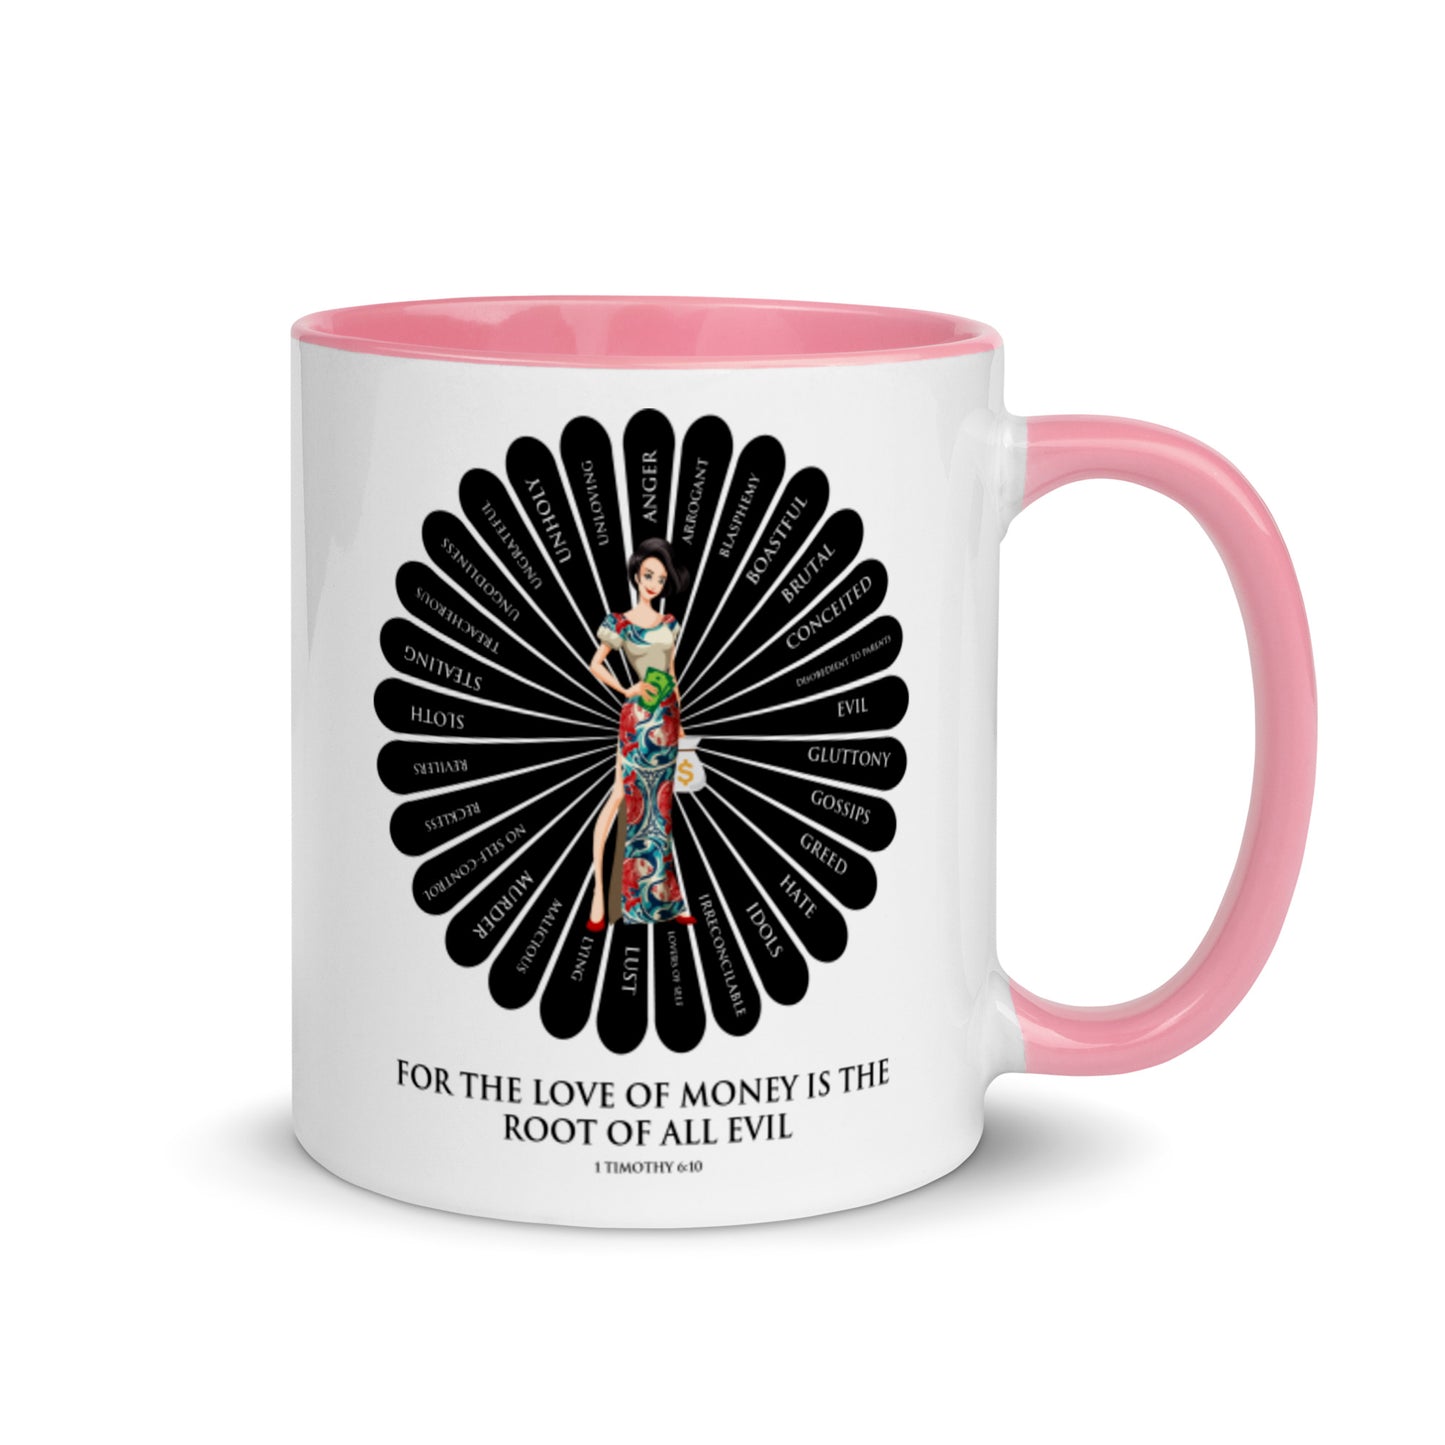 For the Love of Money Mug with Color Inside